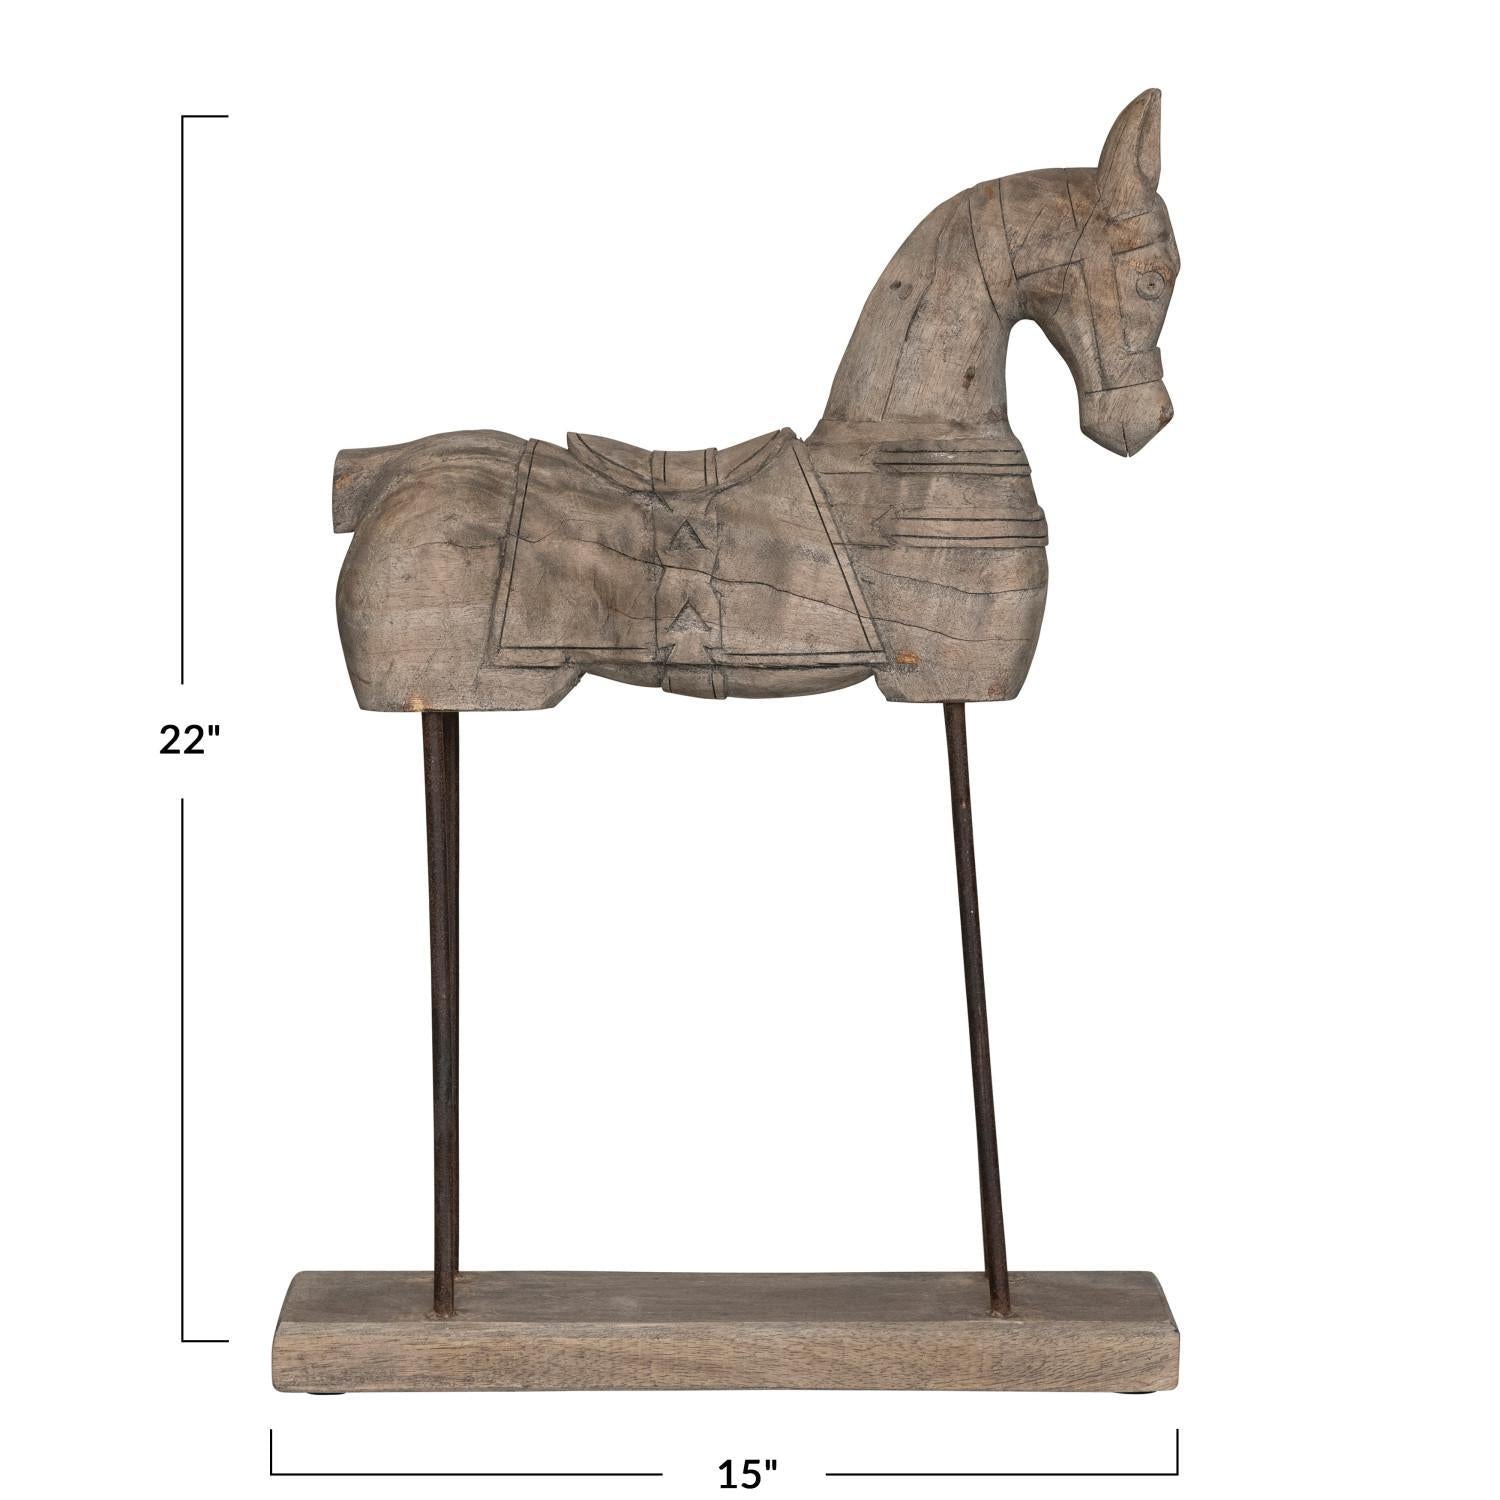 Wood Horse on Stand